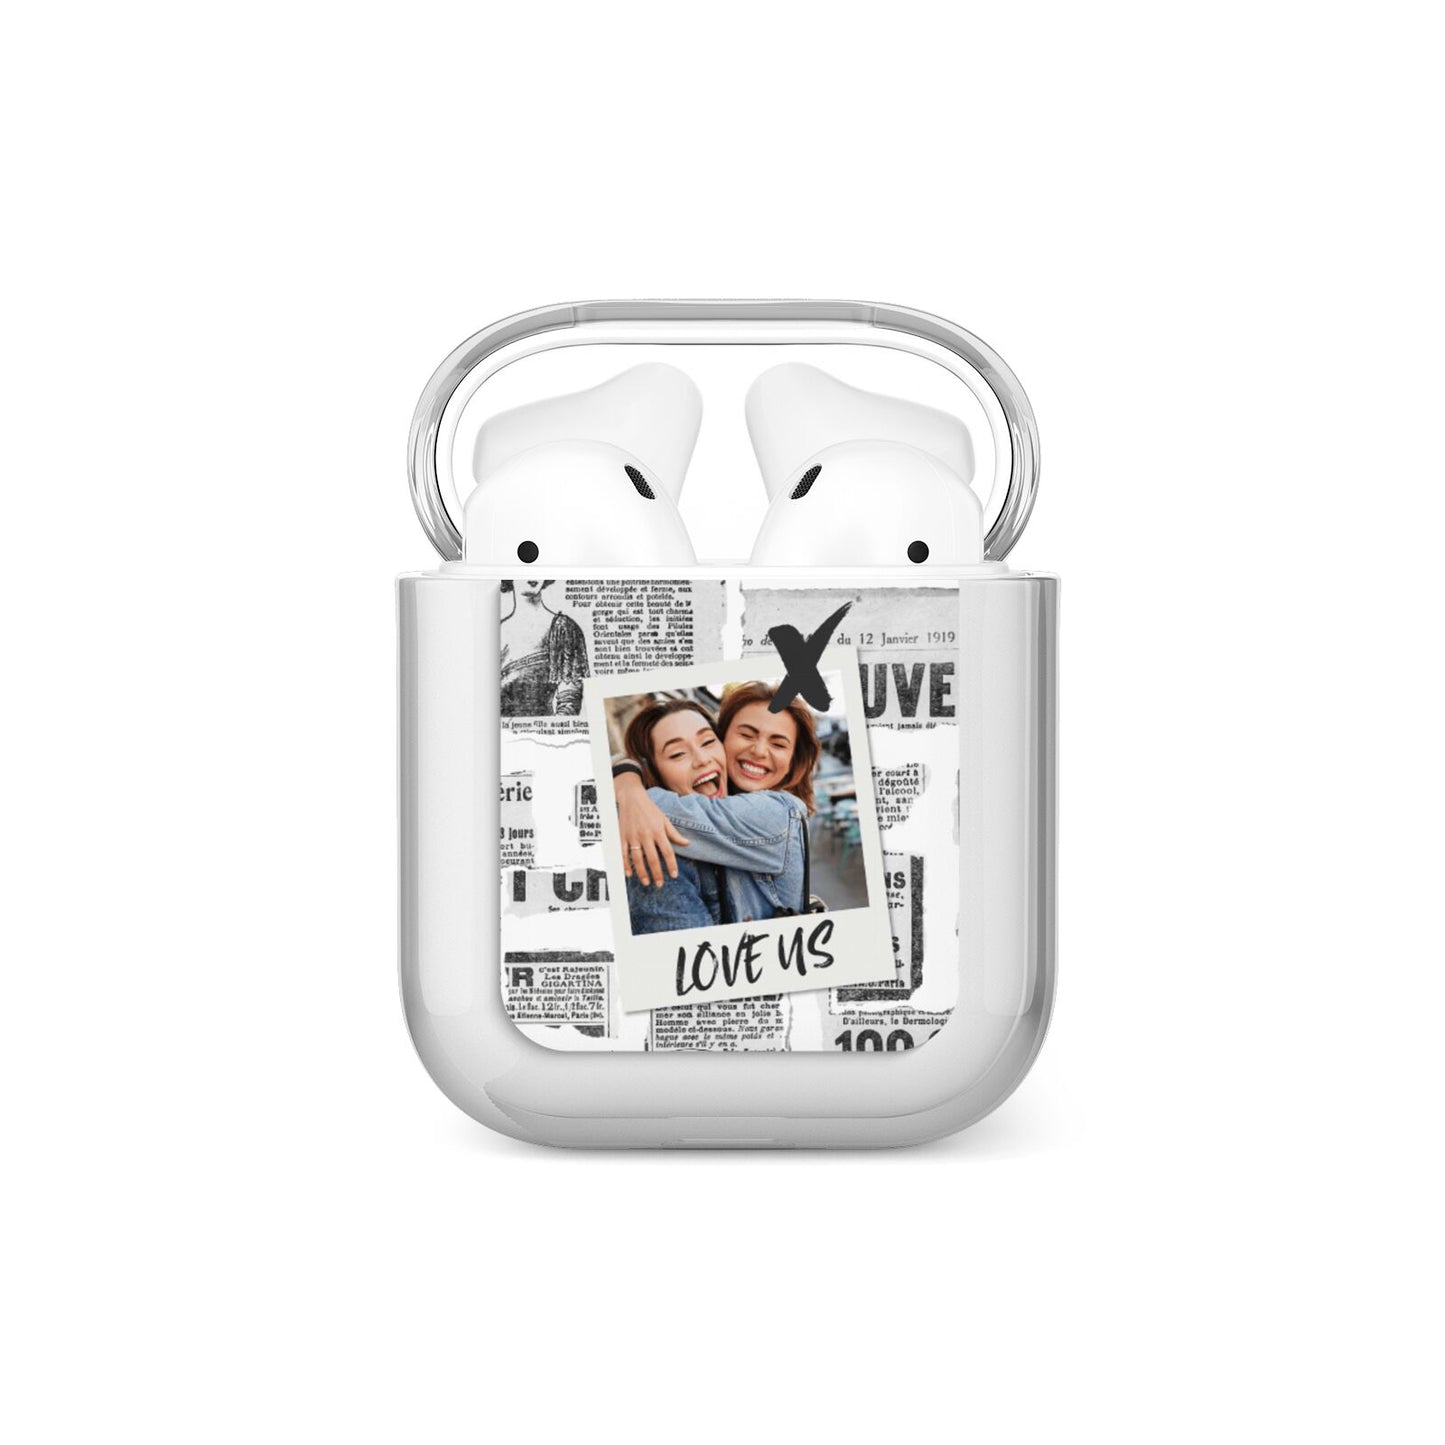 Newspaper Collage Photo Personalised AirPods Case